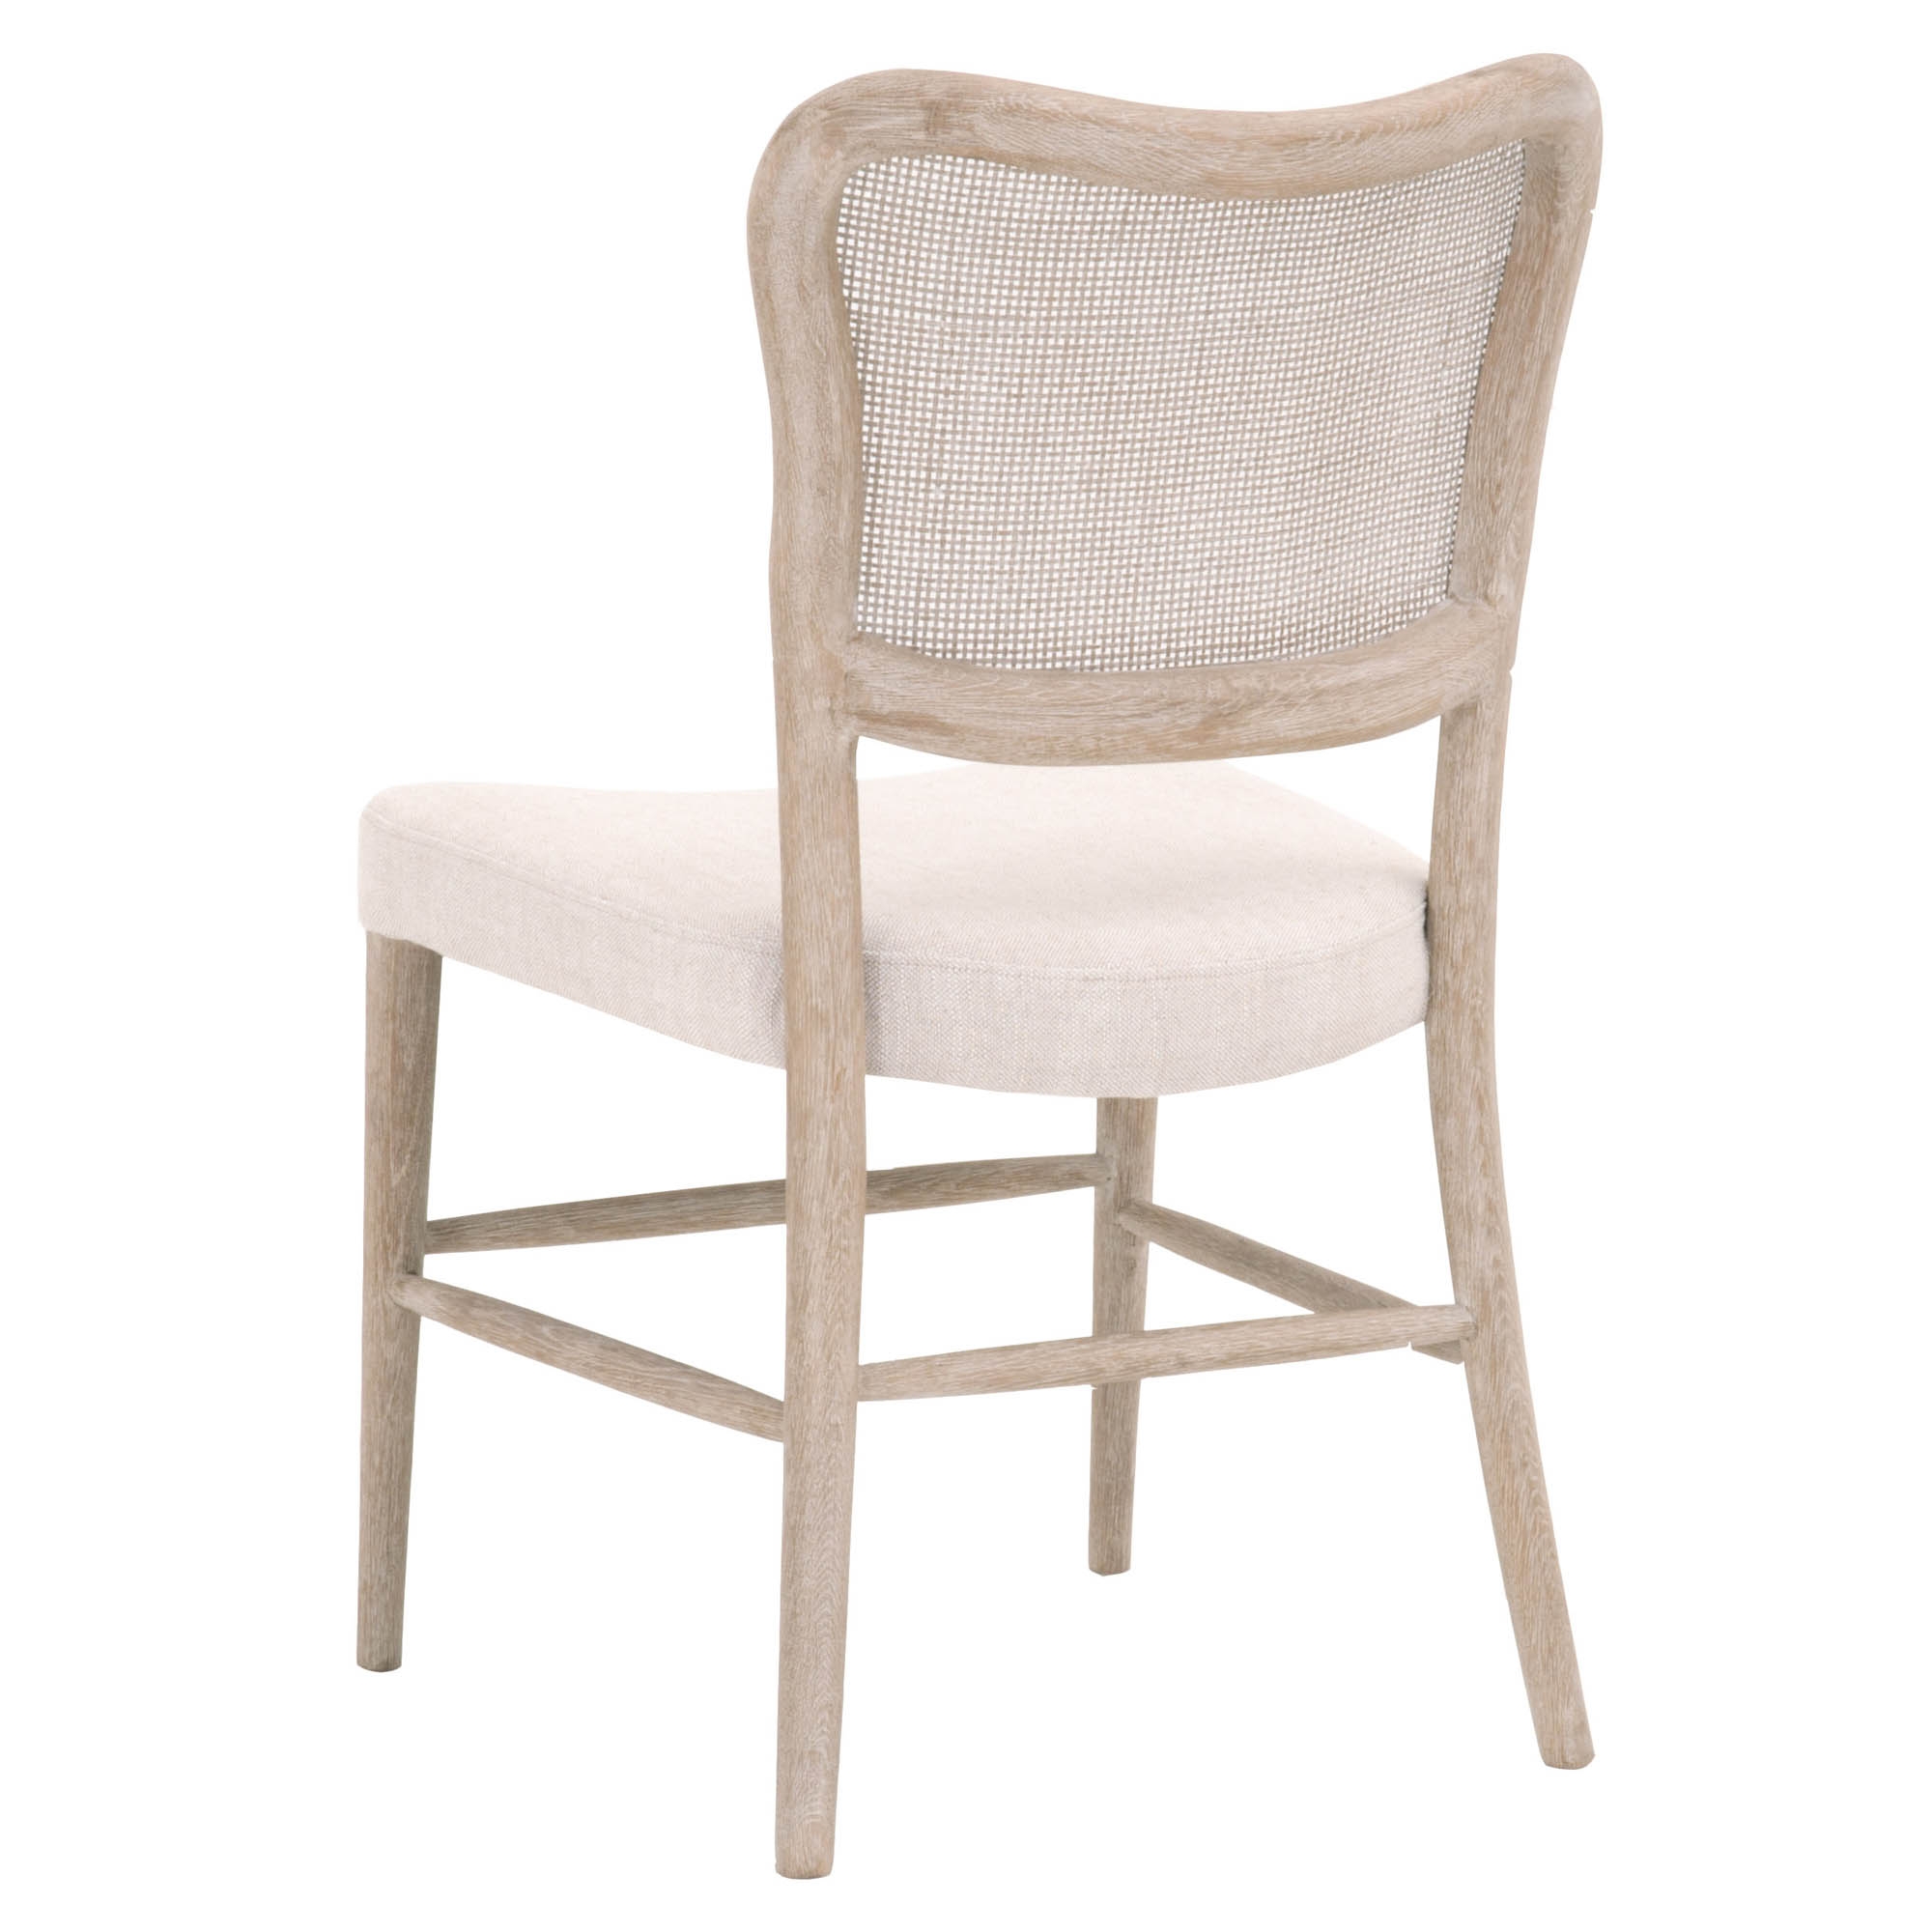 Coraline Dining Chair, Bisque, Set of 2 - Image 3